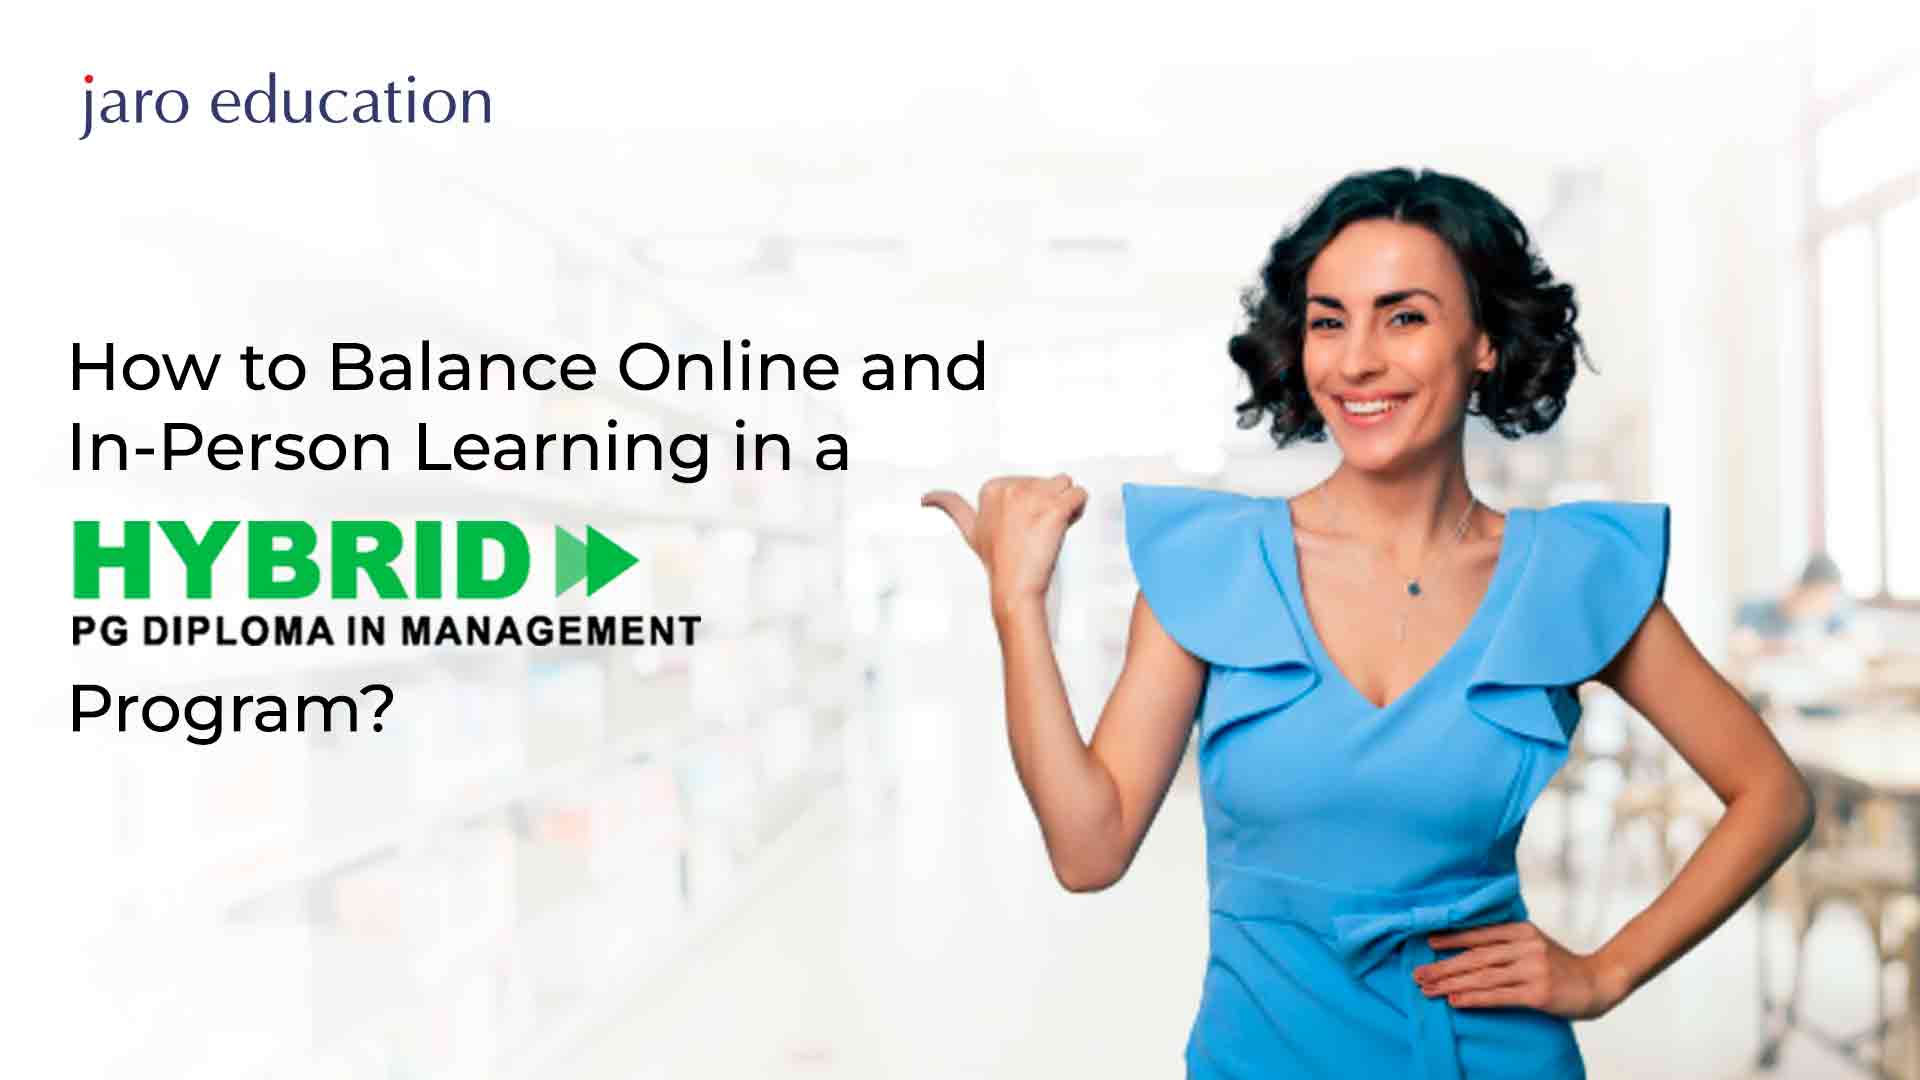 How-to-Balance-Online-and-In-Person-Learning-in-a-Hybrid-PGDM-Program-Jaro